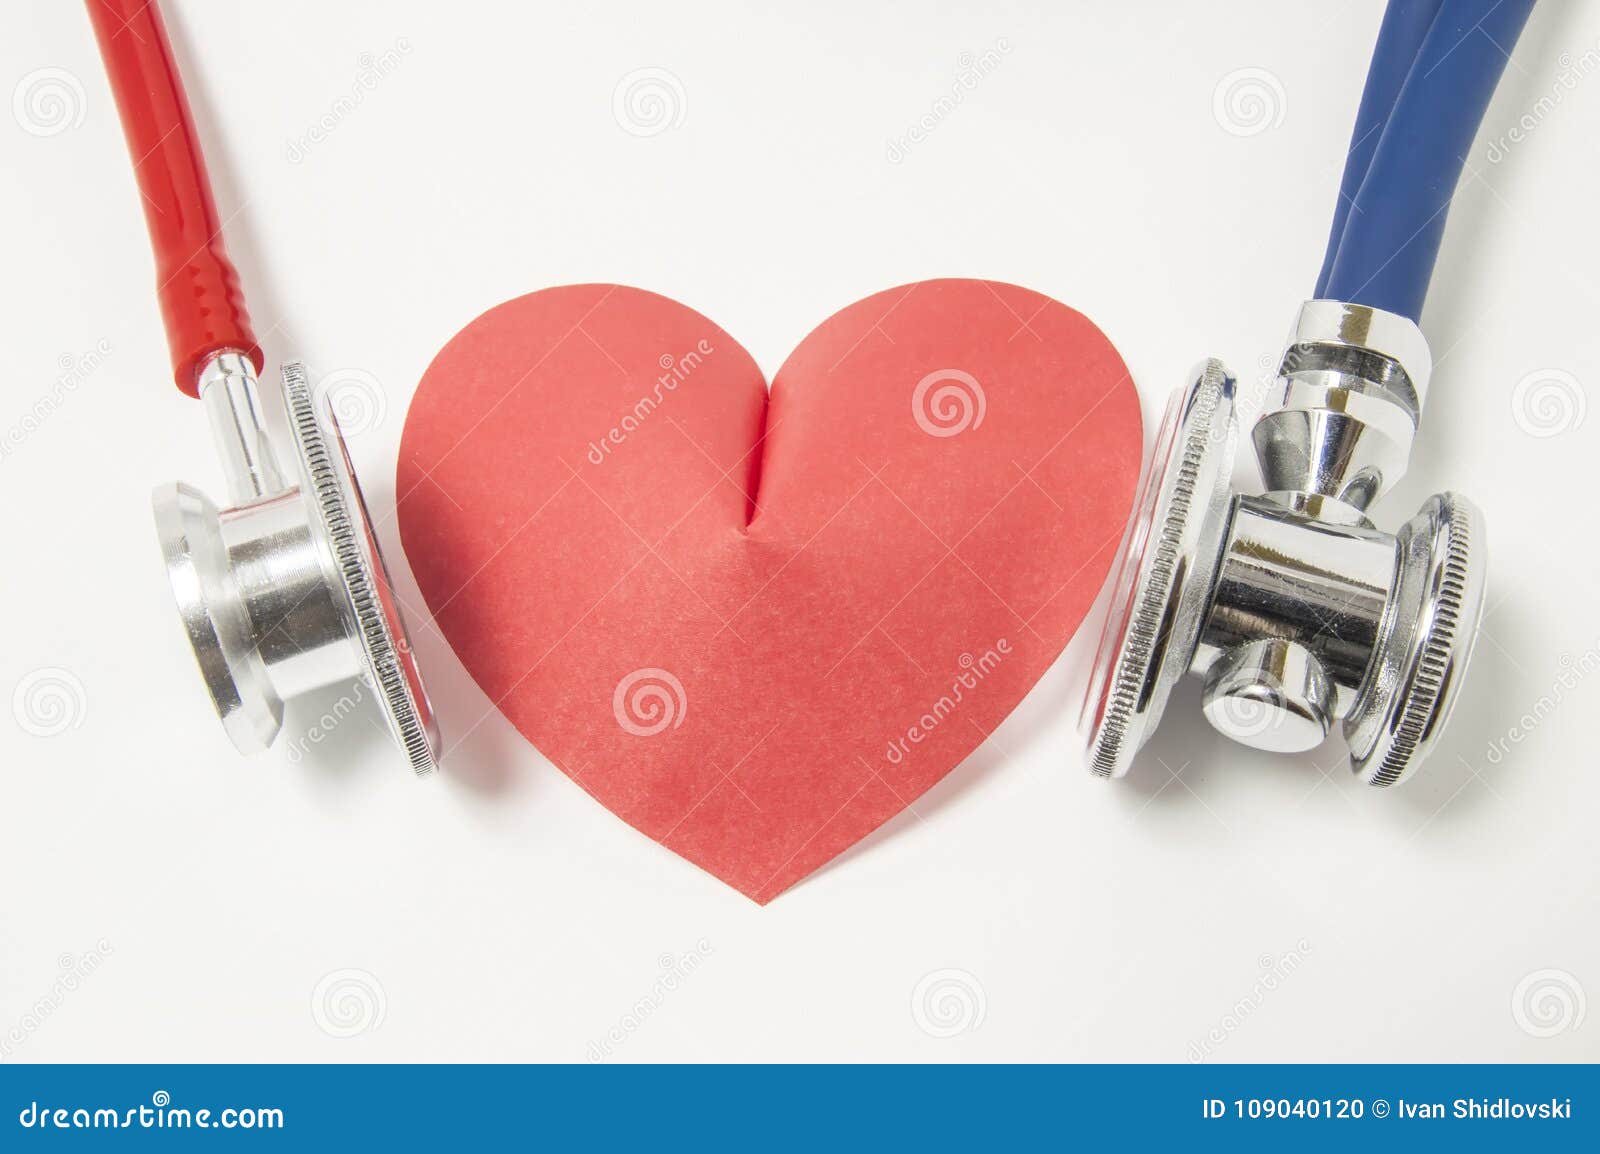 two stethoscope blue and red are examined listening or auscultation heart  left and right side on white background. detai